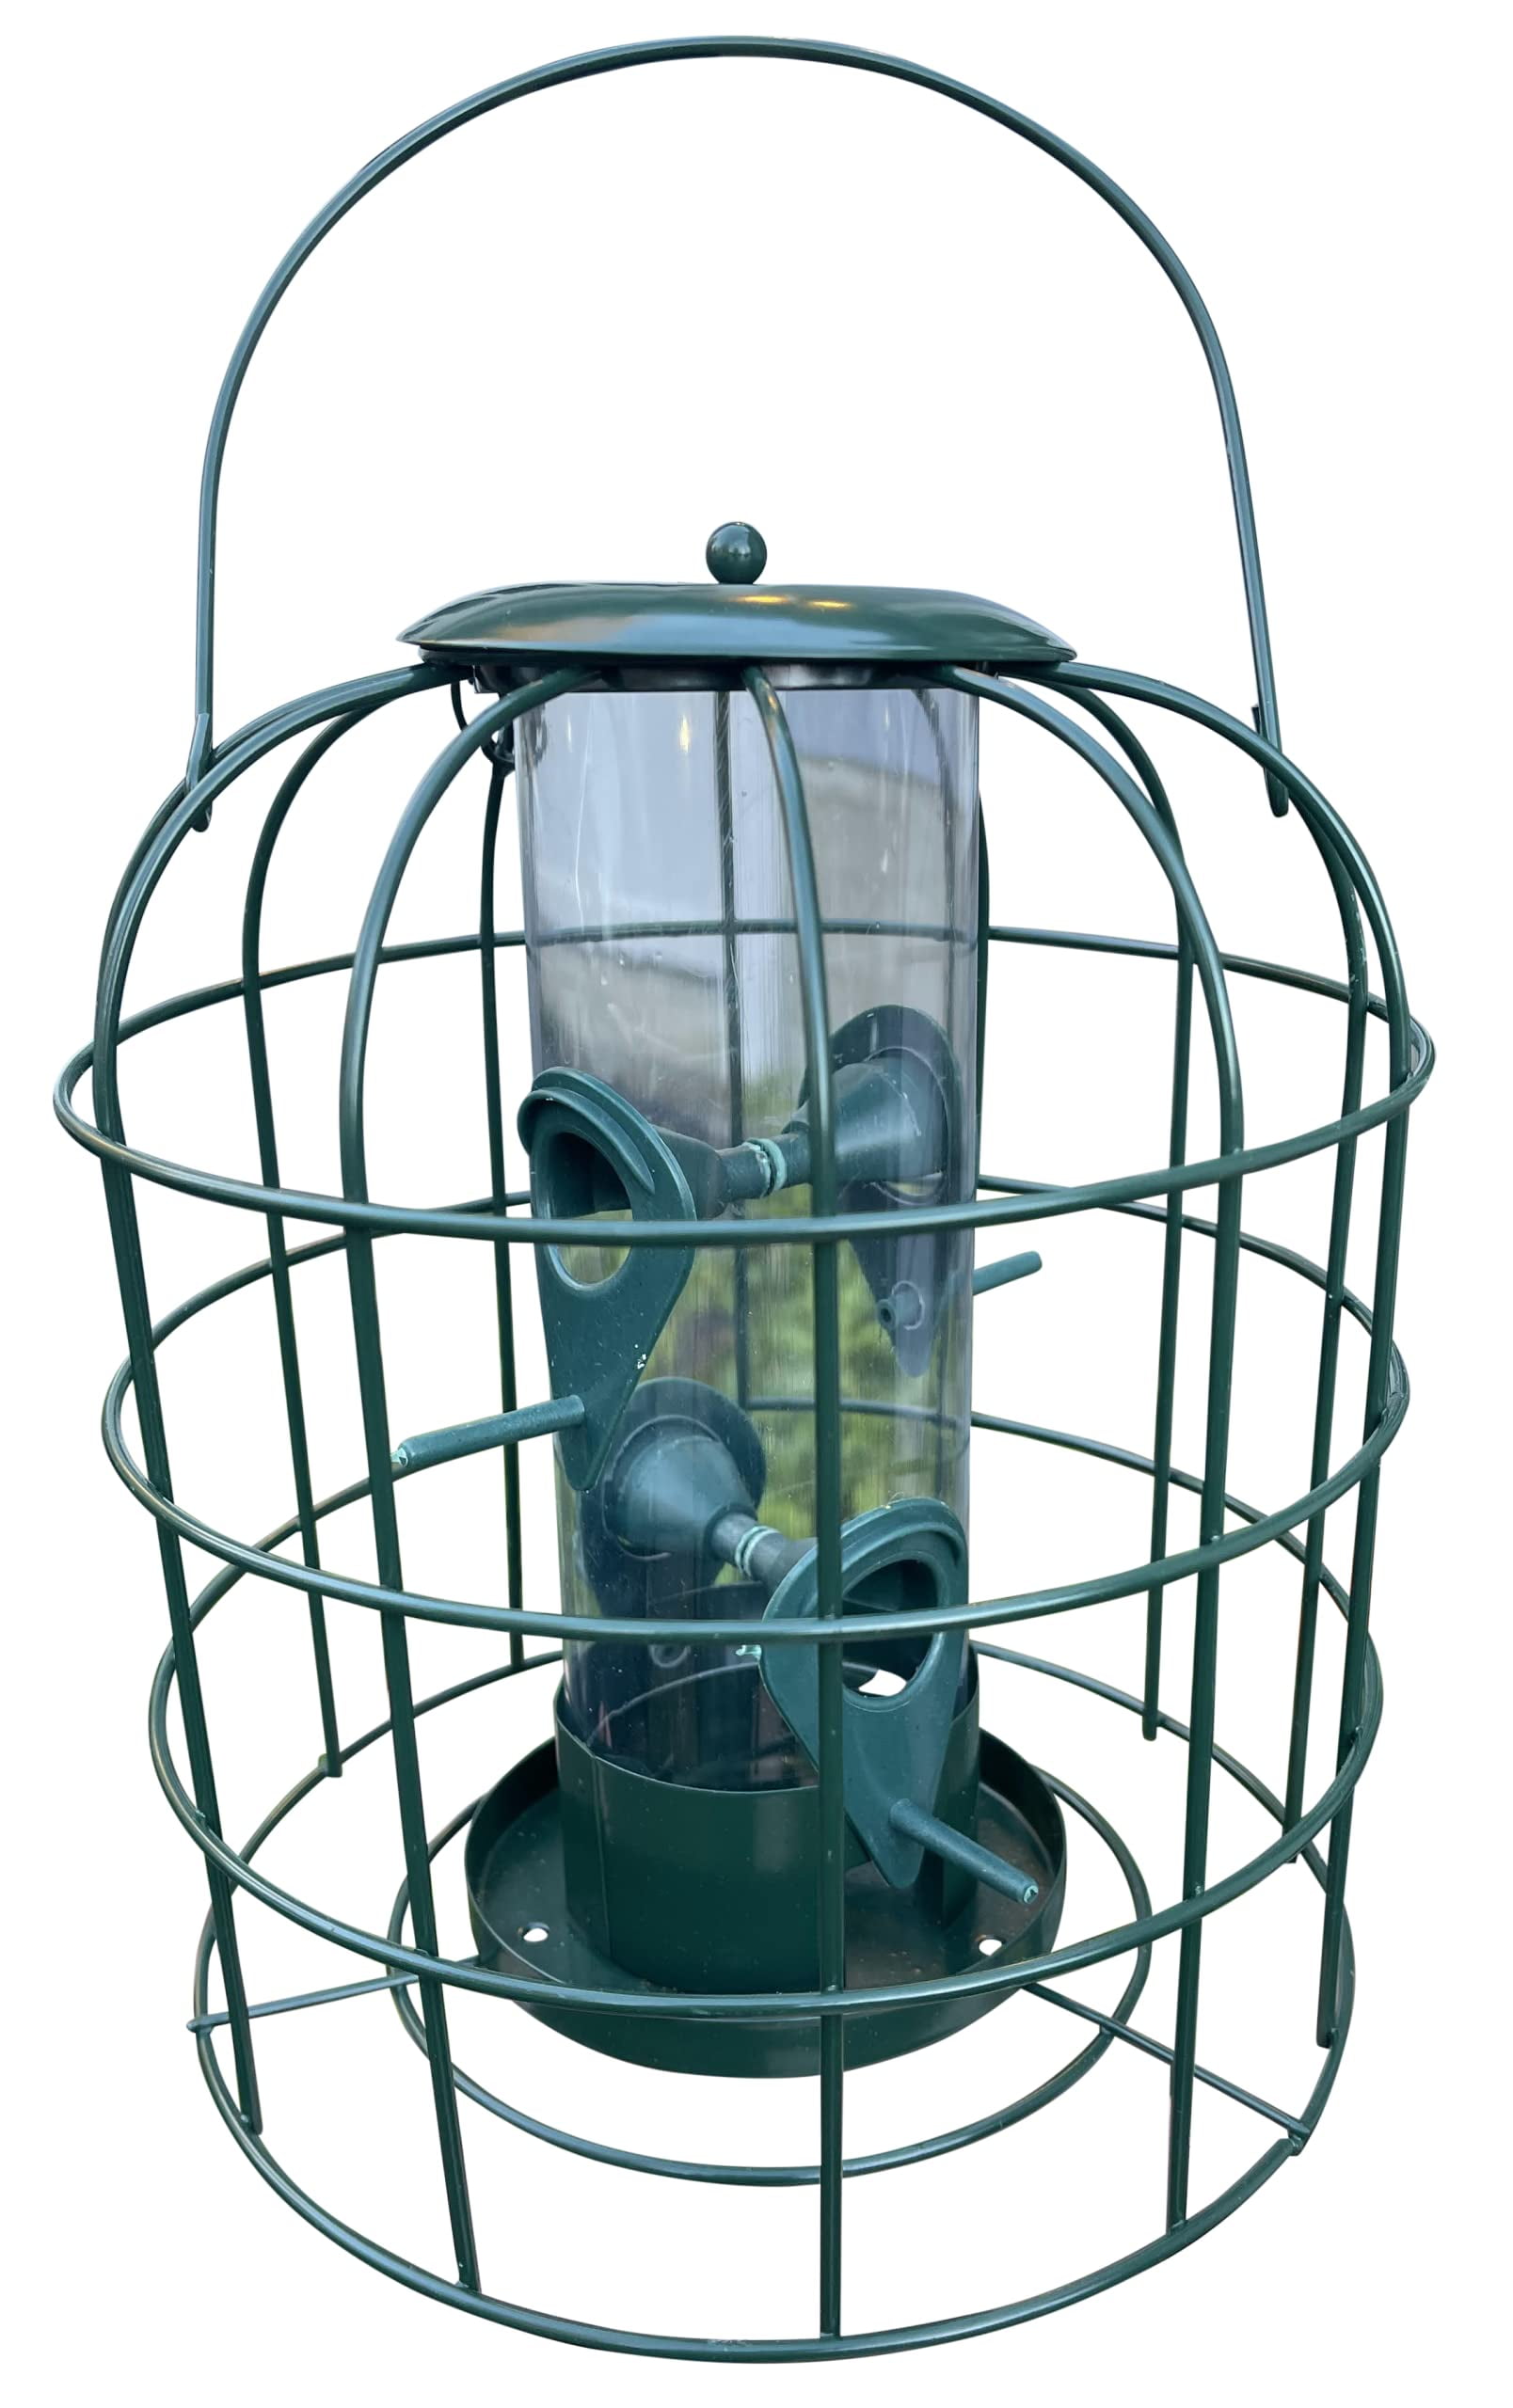 Squirrel Proof Resistant Wild Garden Bird Guard Cage Seed and Peanut Feeders 